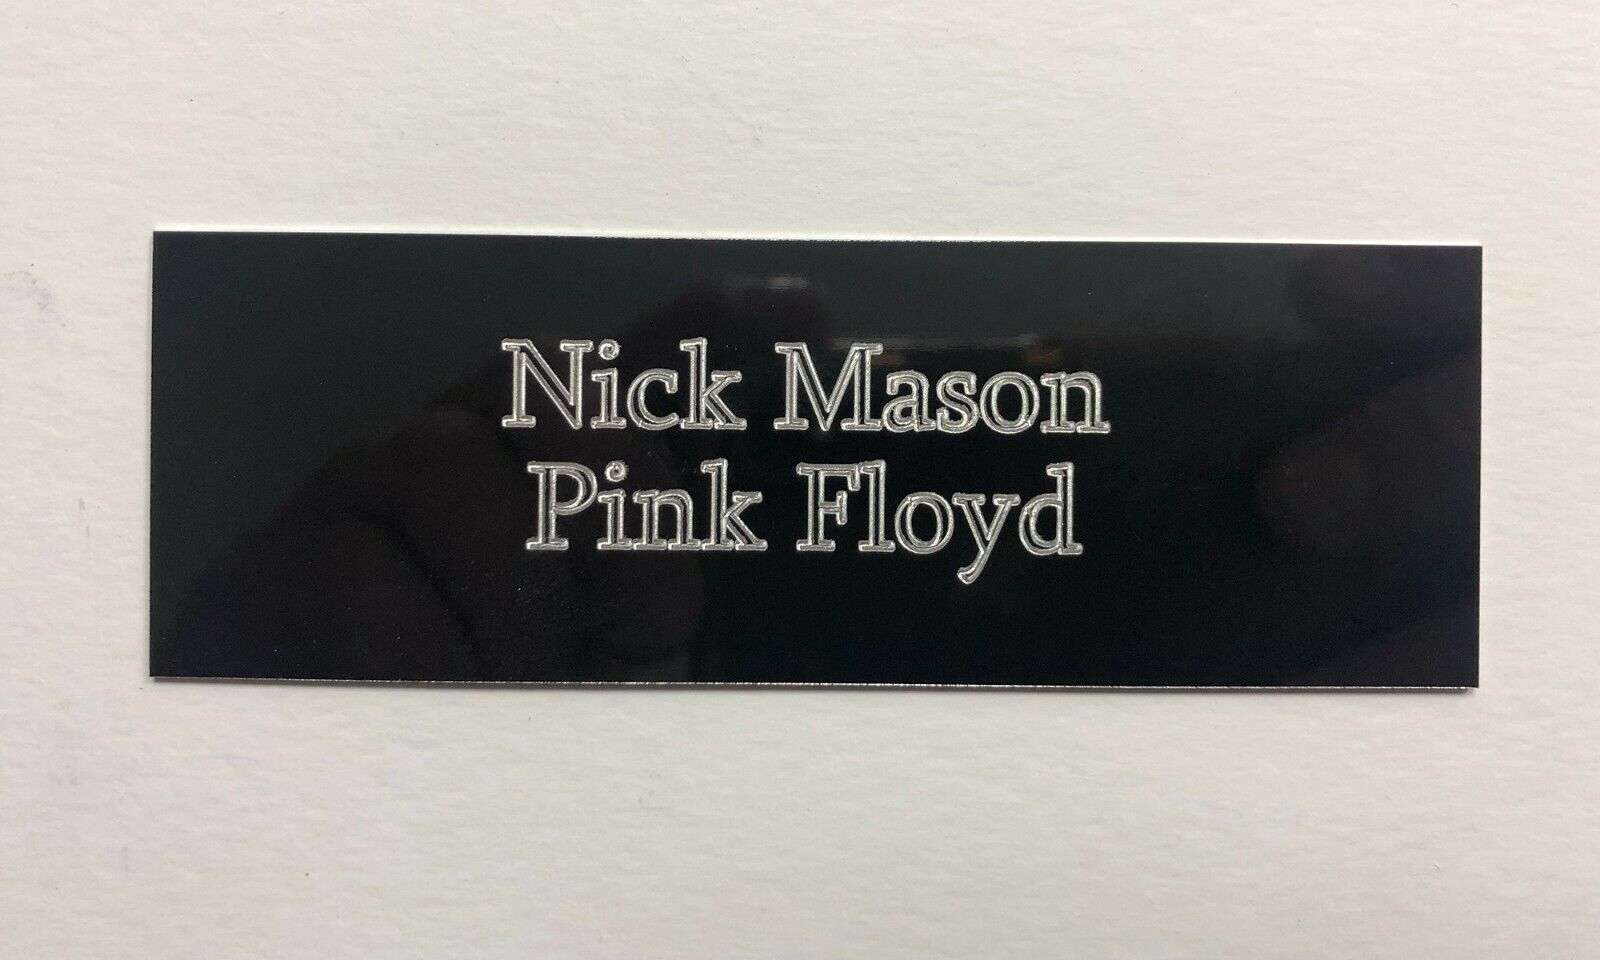 Nick Mason Pink Floyd - 105x35mm Engraved Plaque Plate for Signed Photo Poster painting Display